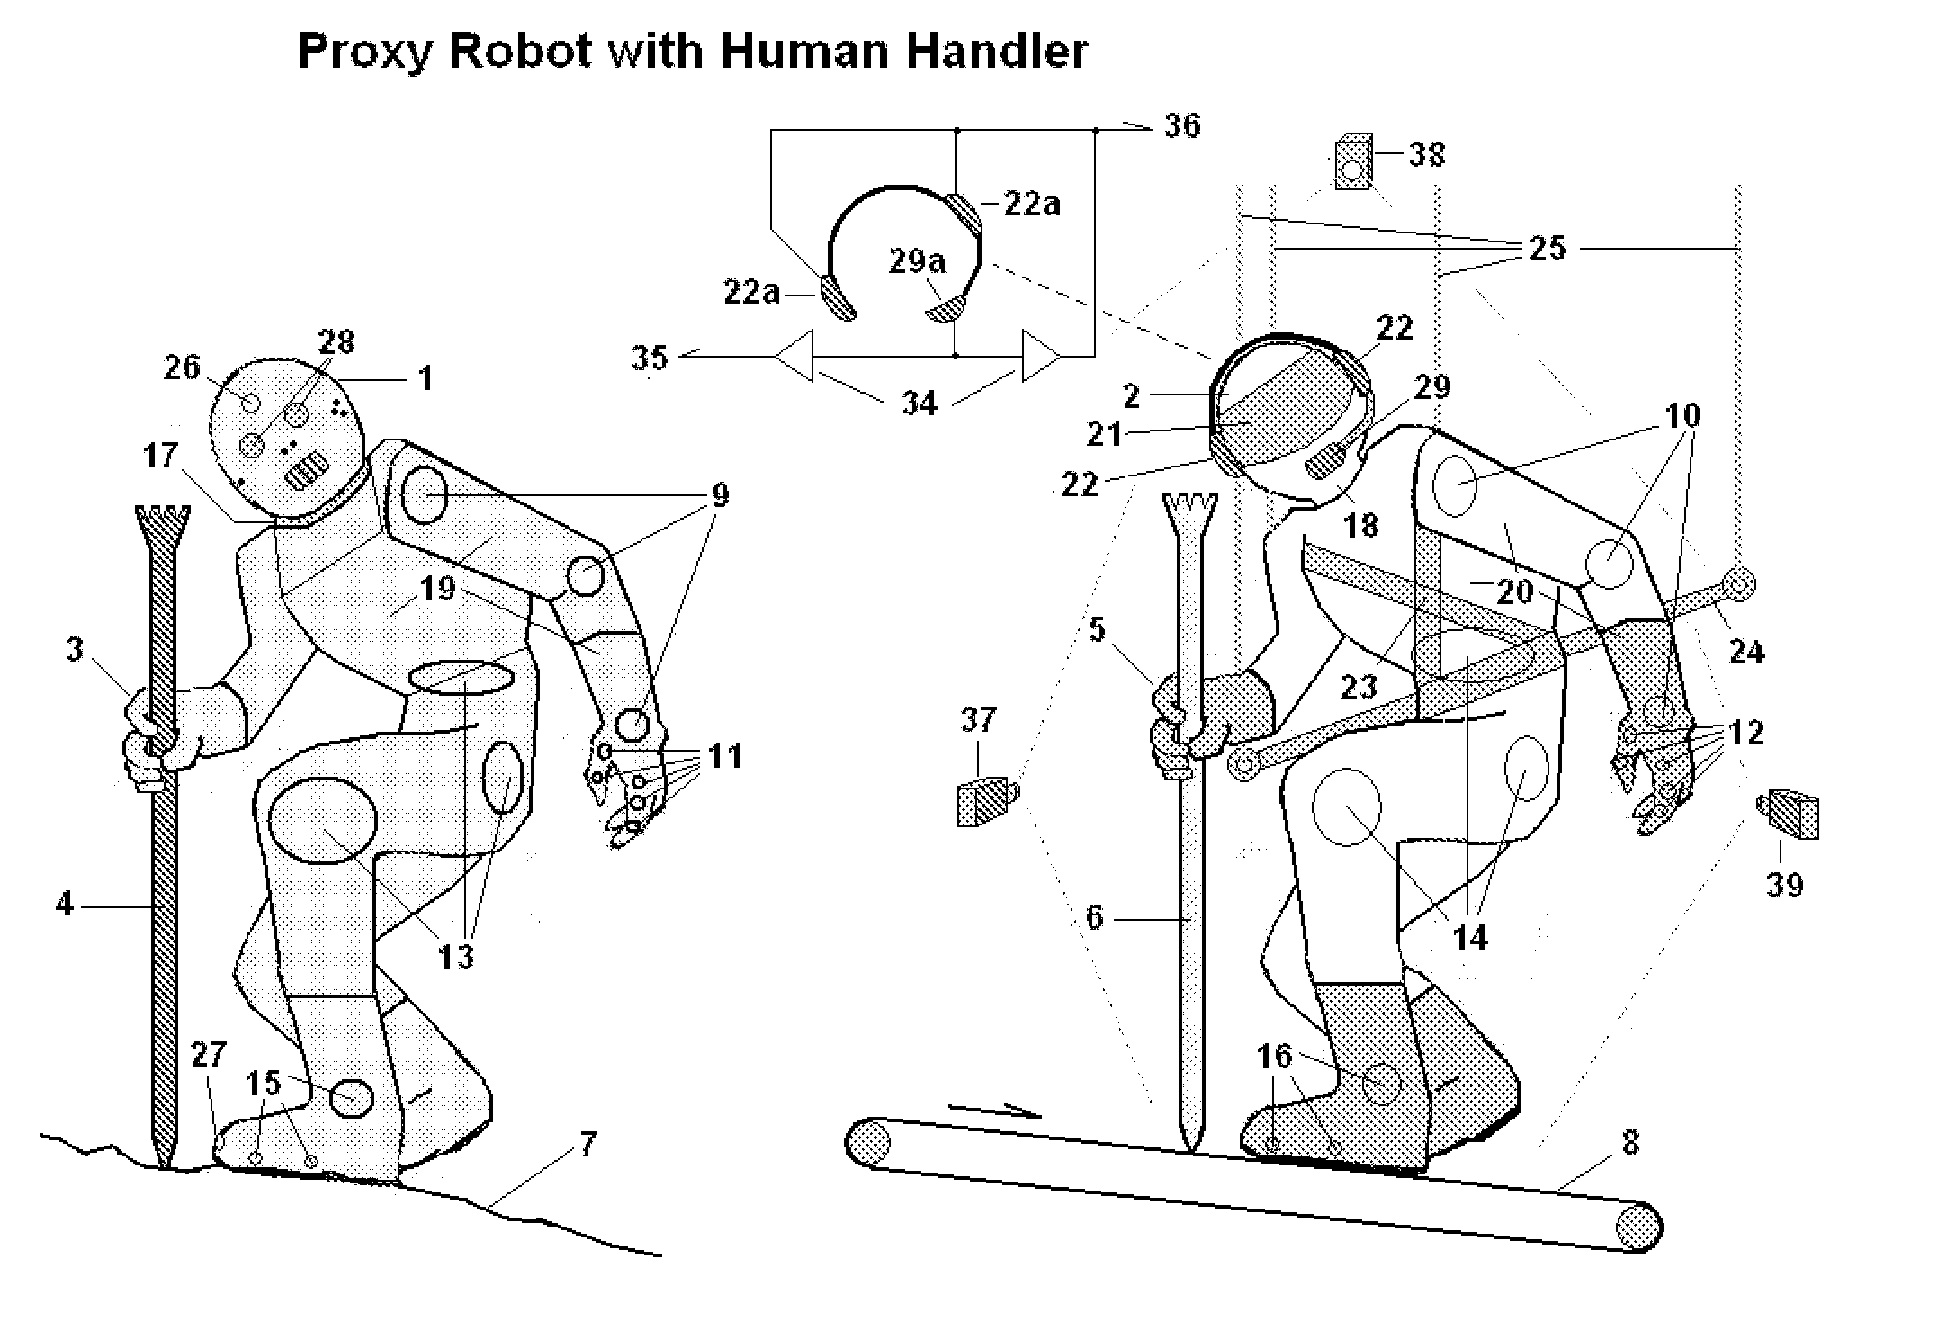 Proxy Robots and Remote Environment Simulator for Their Human Handlers